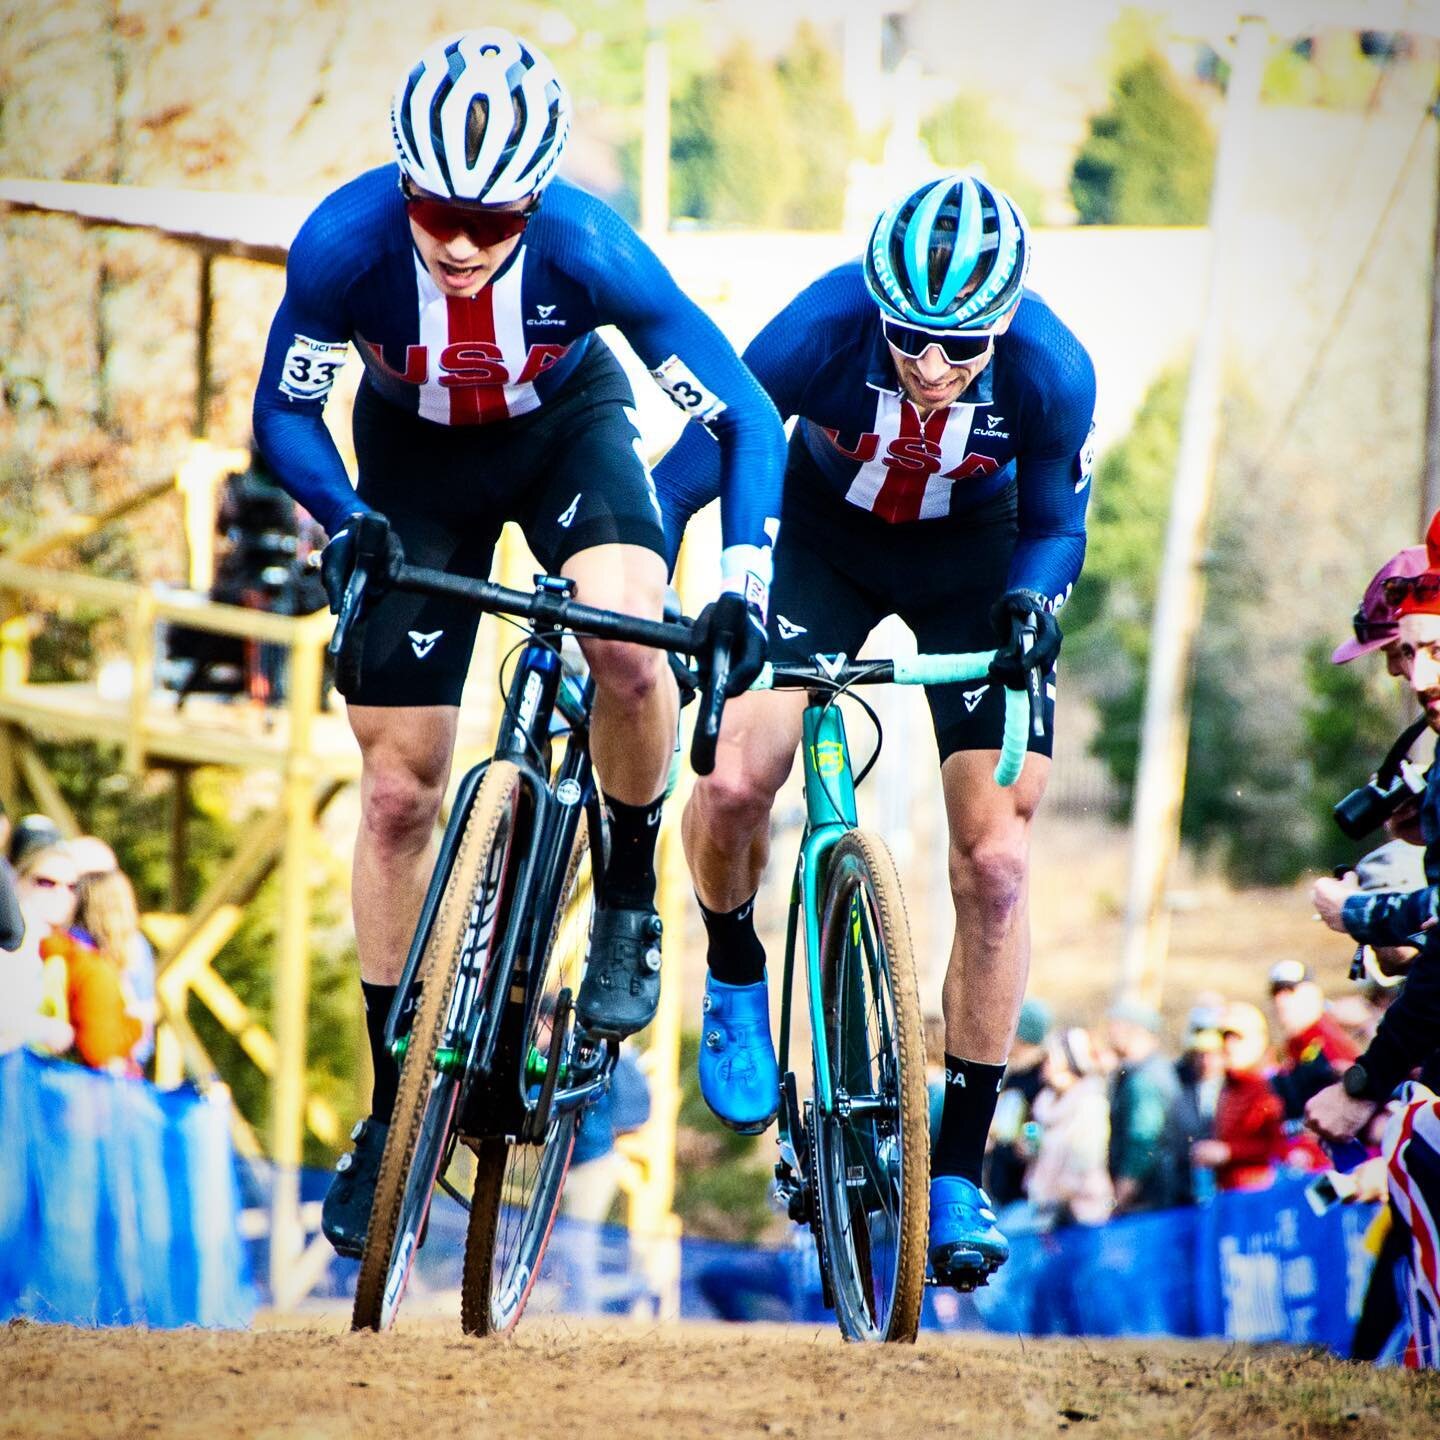 Super cool to witness the rare occurrence of a Cyclocross World Championship in the US last weekend. Good work on the course build @rocksolidtrails ! 
Also, nice to see @oretoshore champ and the youngest ever elite @cswartzz in the mix.
@cxfayettevil